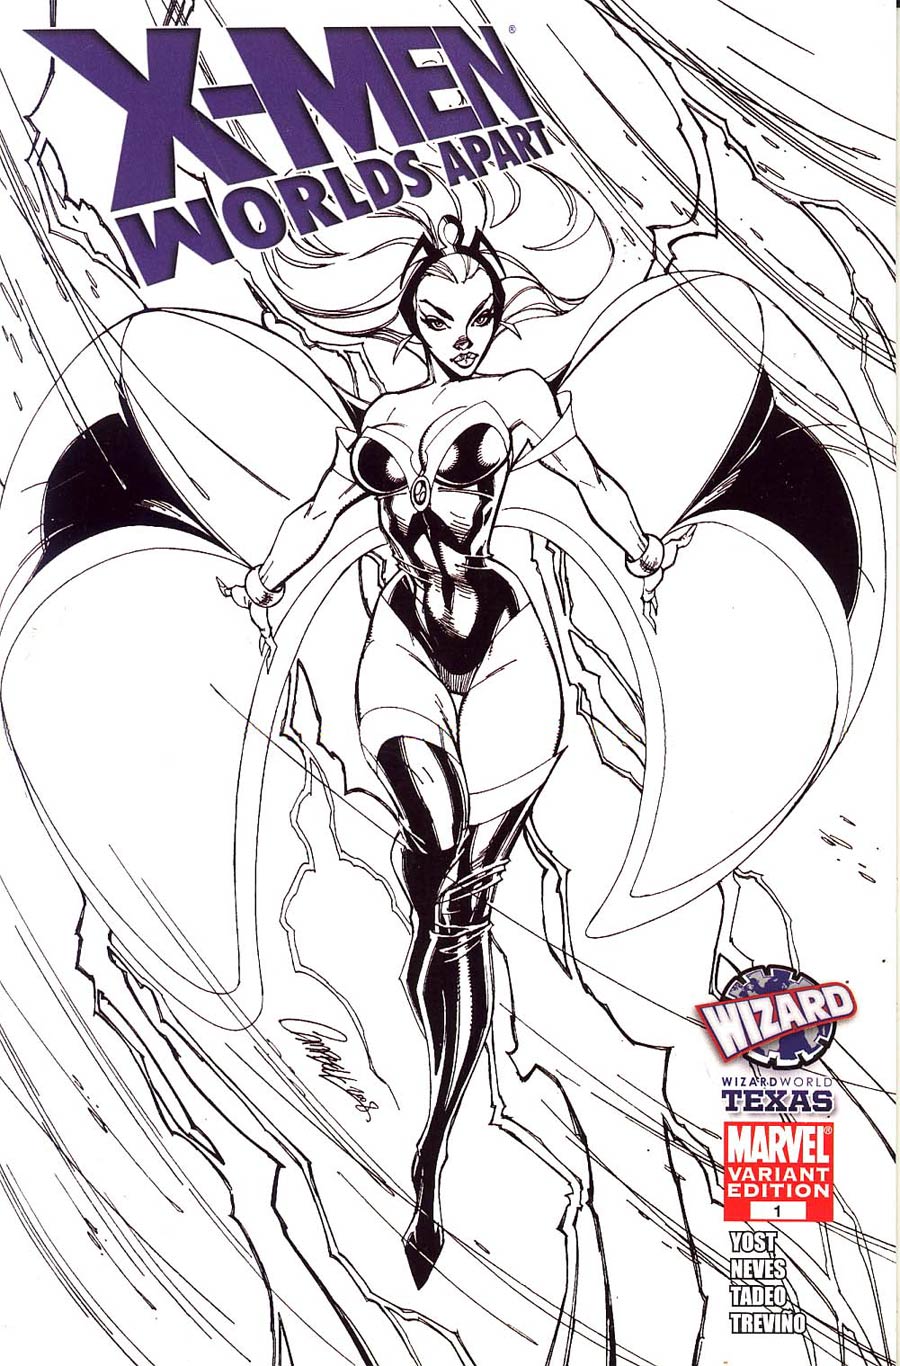 X-Men Worlds Apart #1 Cover B Wizard World Texas Sketch J Scott Campbell Variant Cover